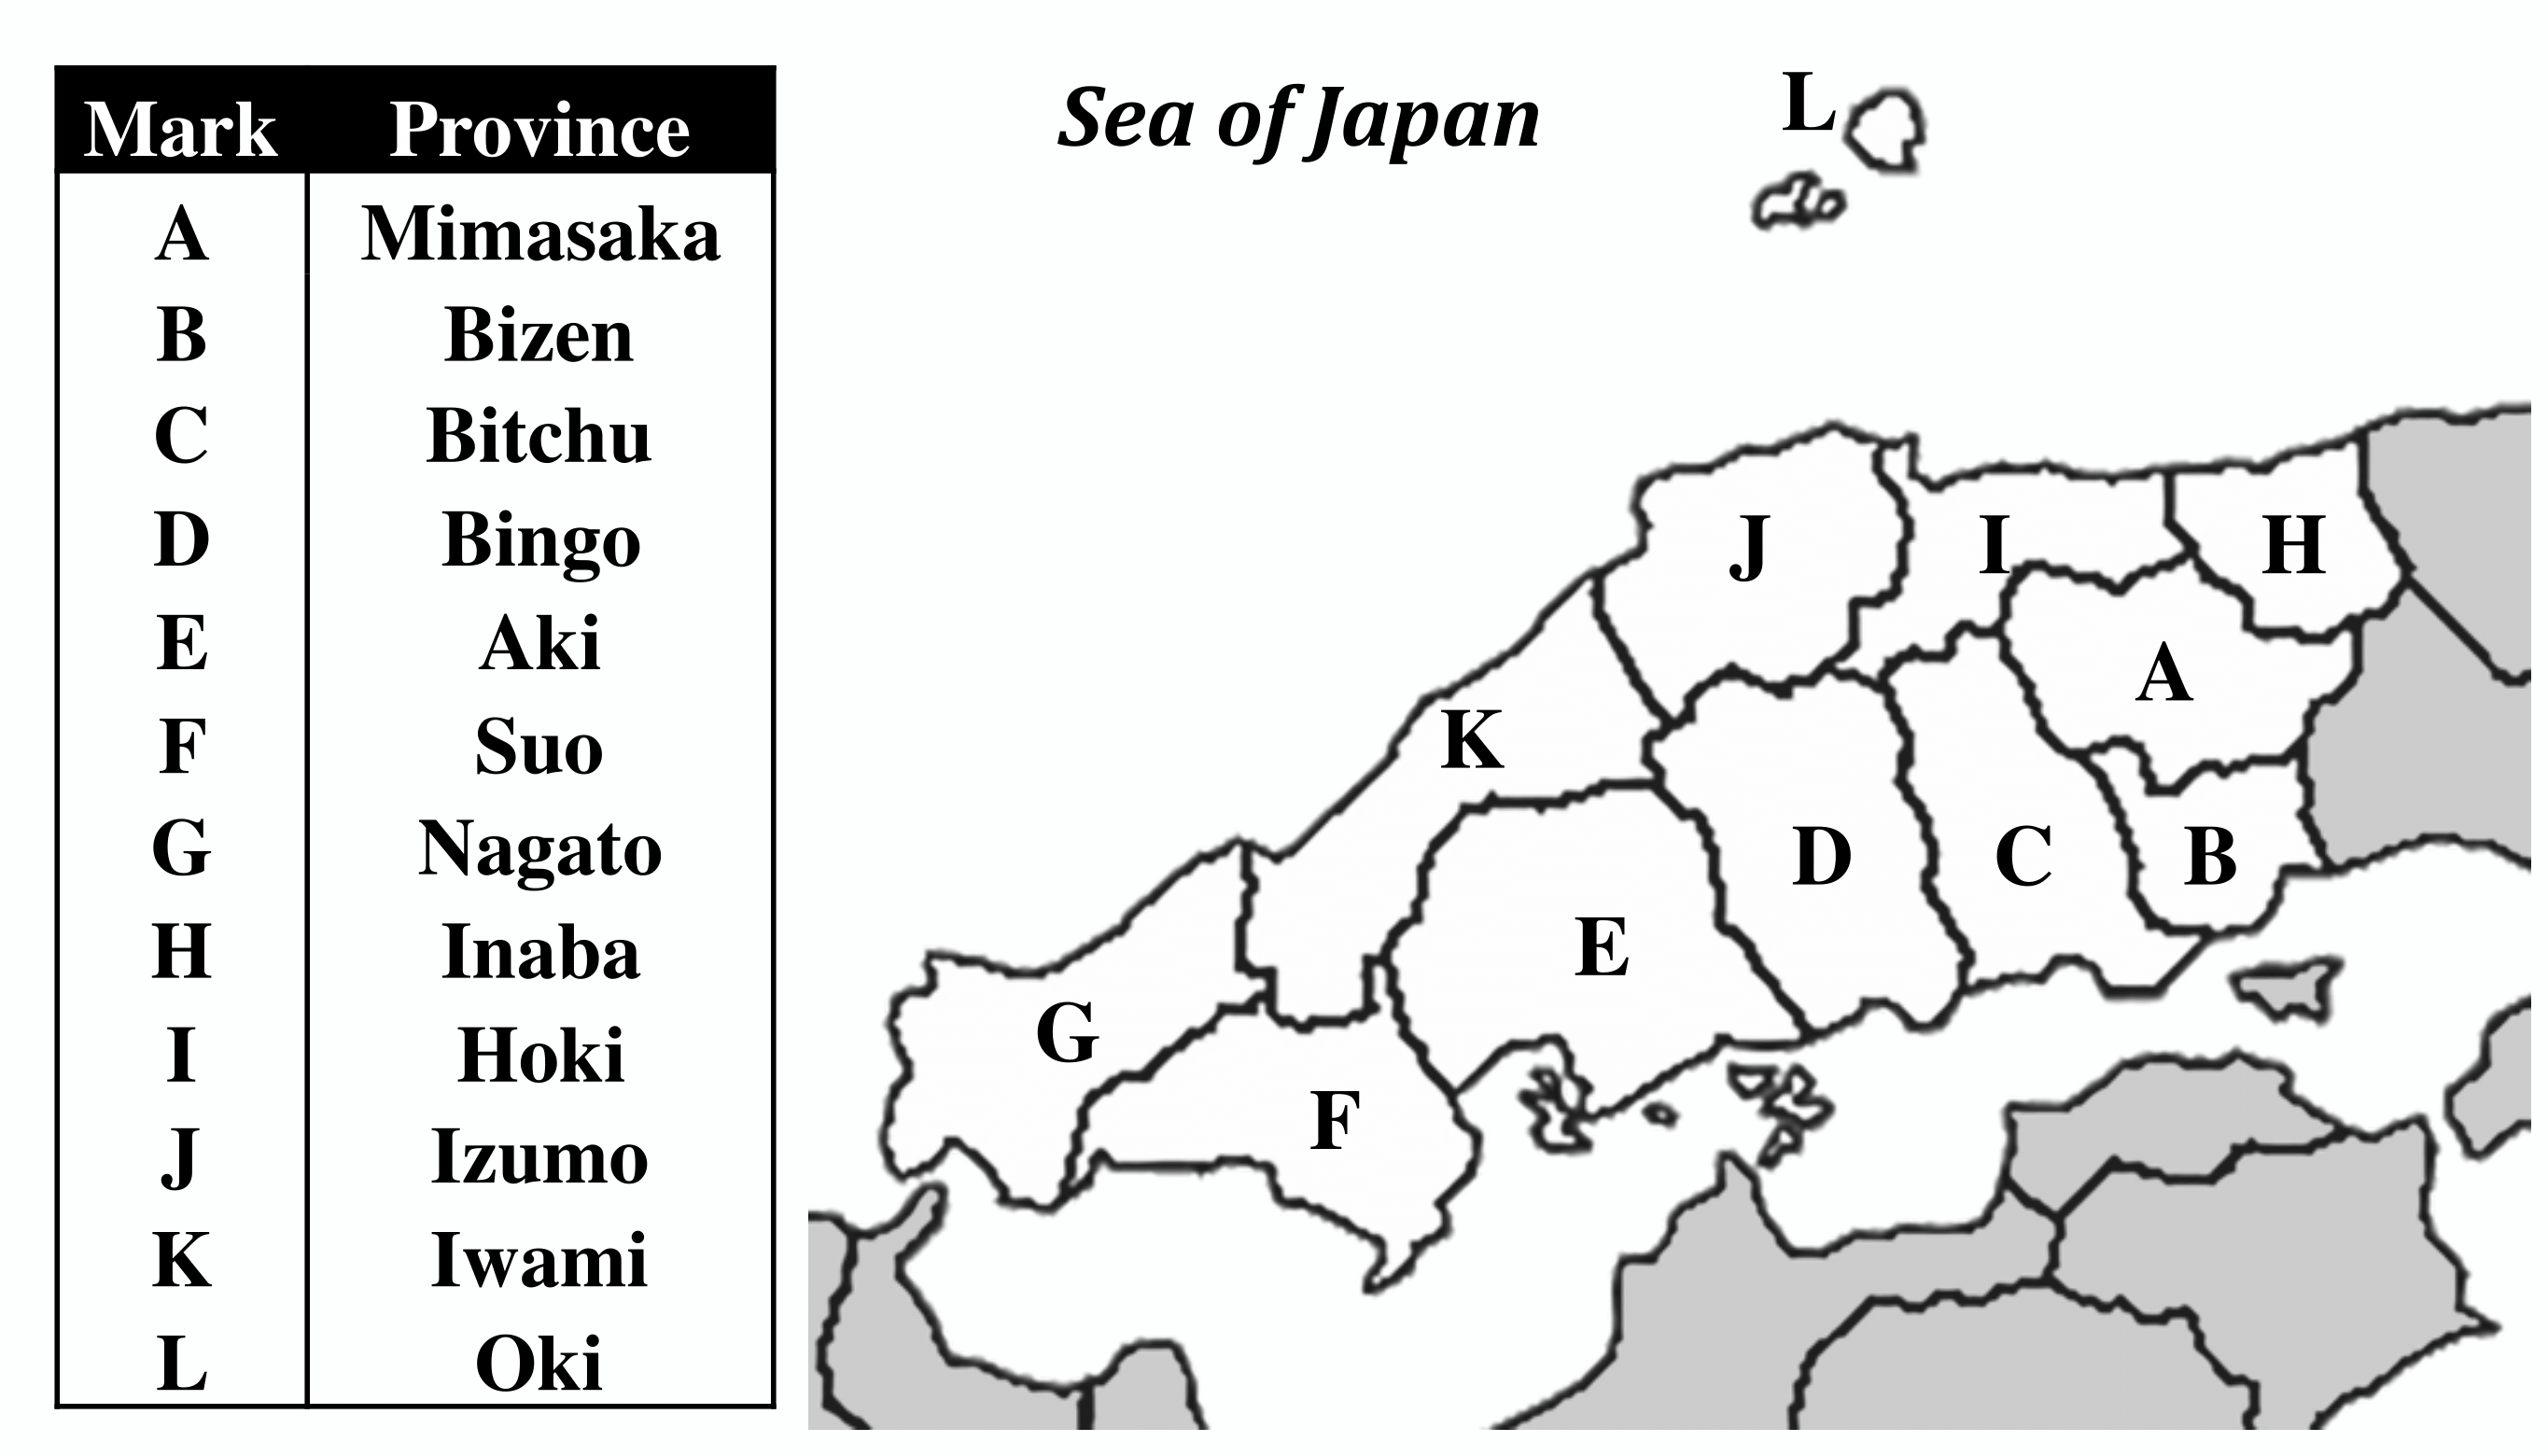 Figure 1: Geographical Divisions of the Chugokuk District Under the Old Province System